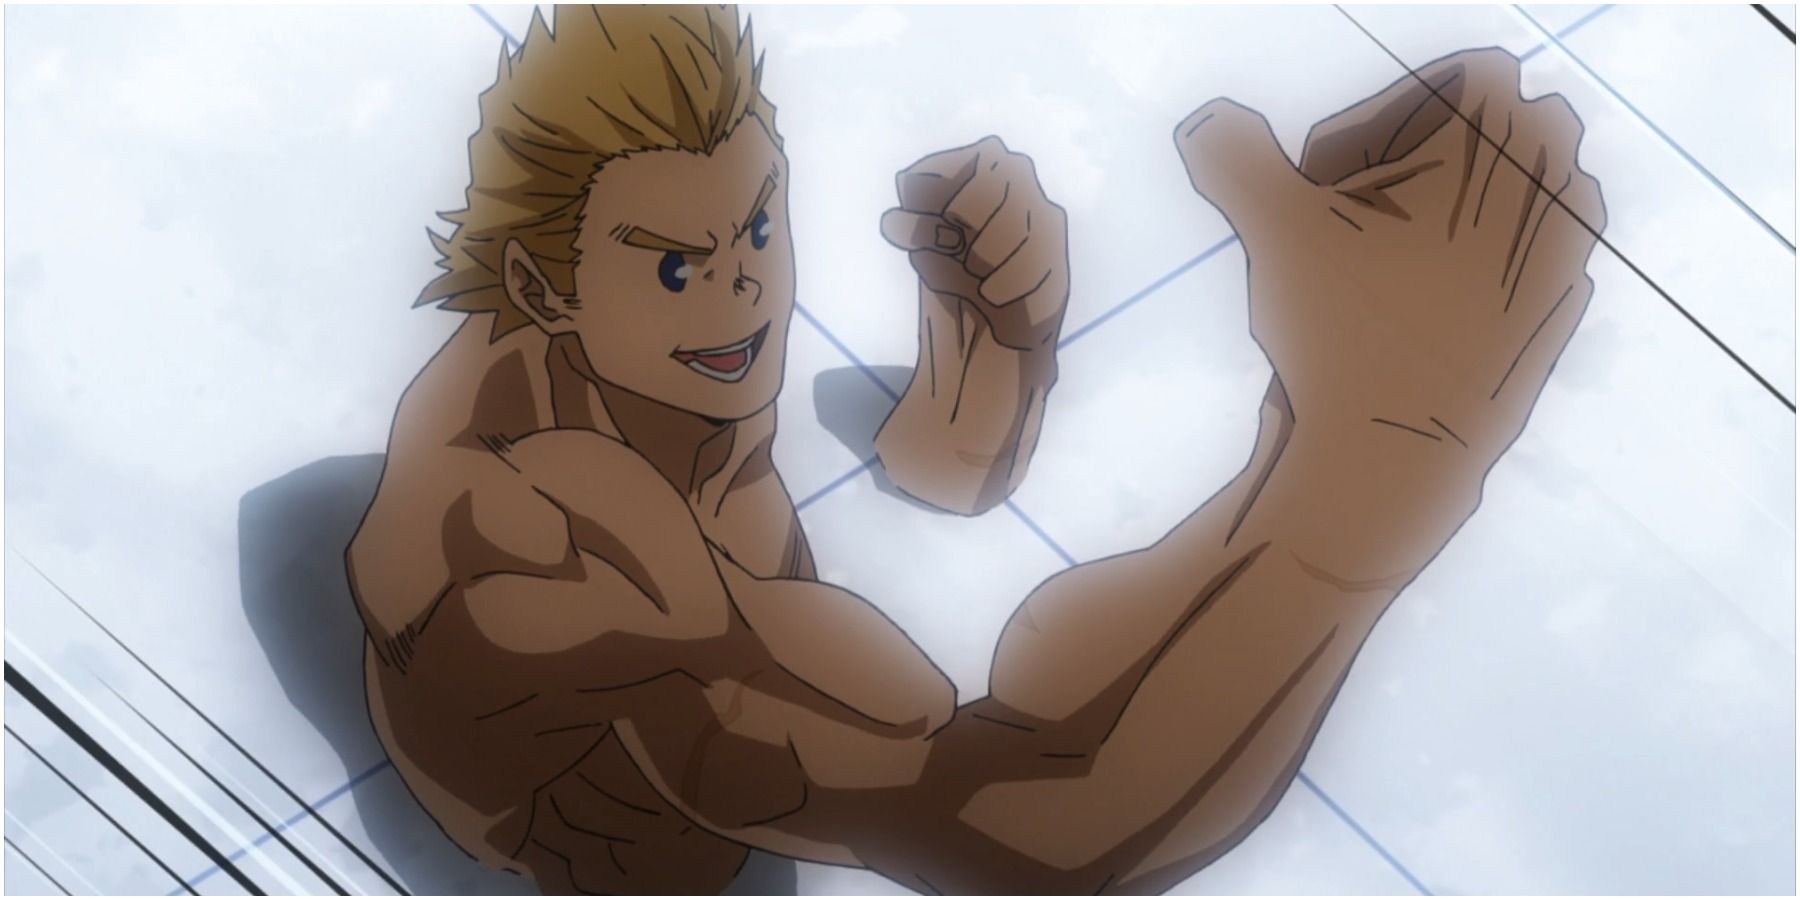 Mirio's Permeation Quirk In Action